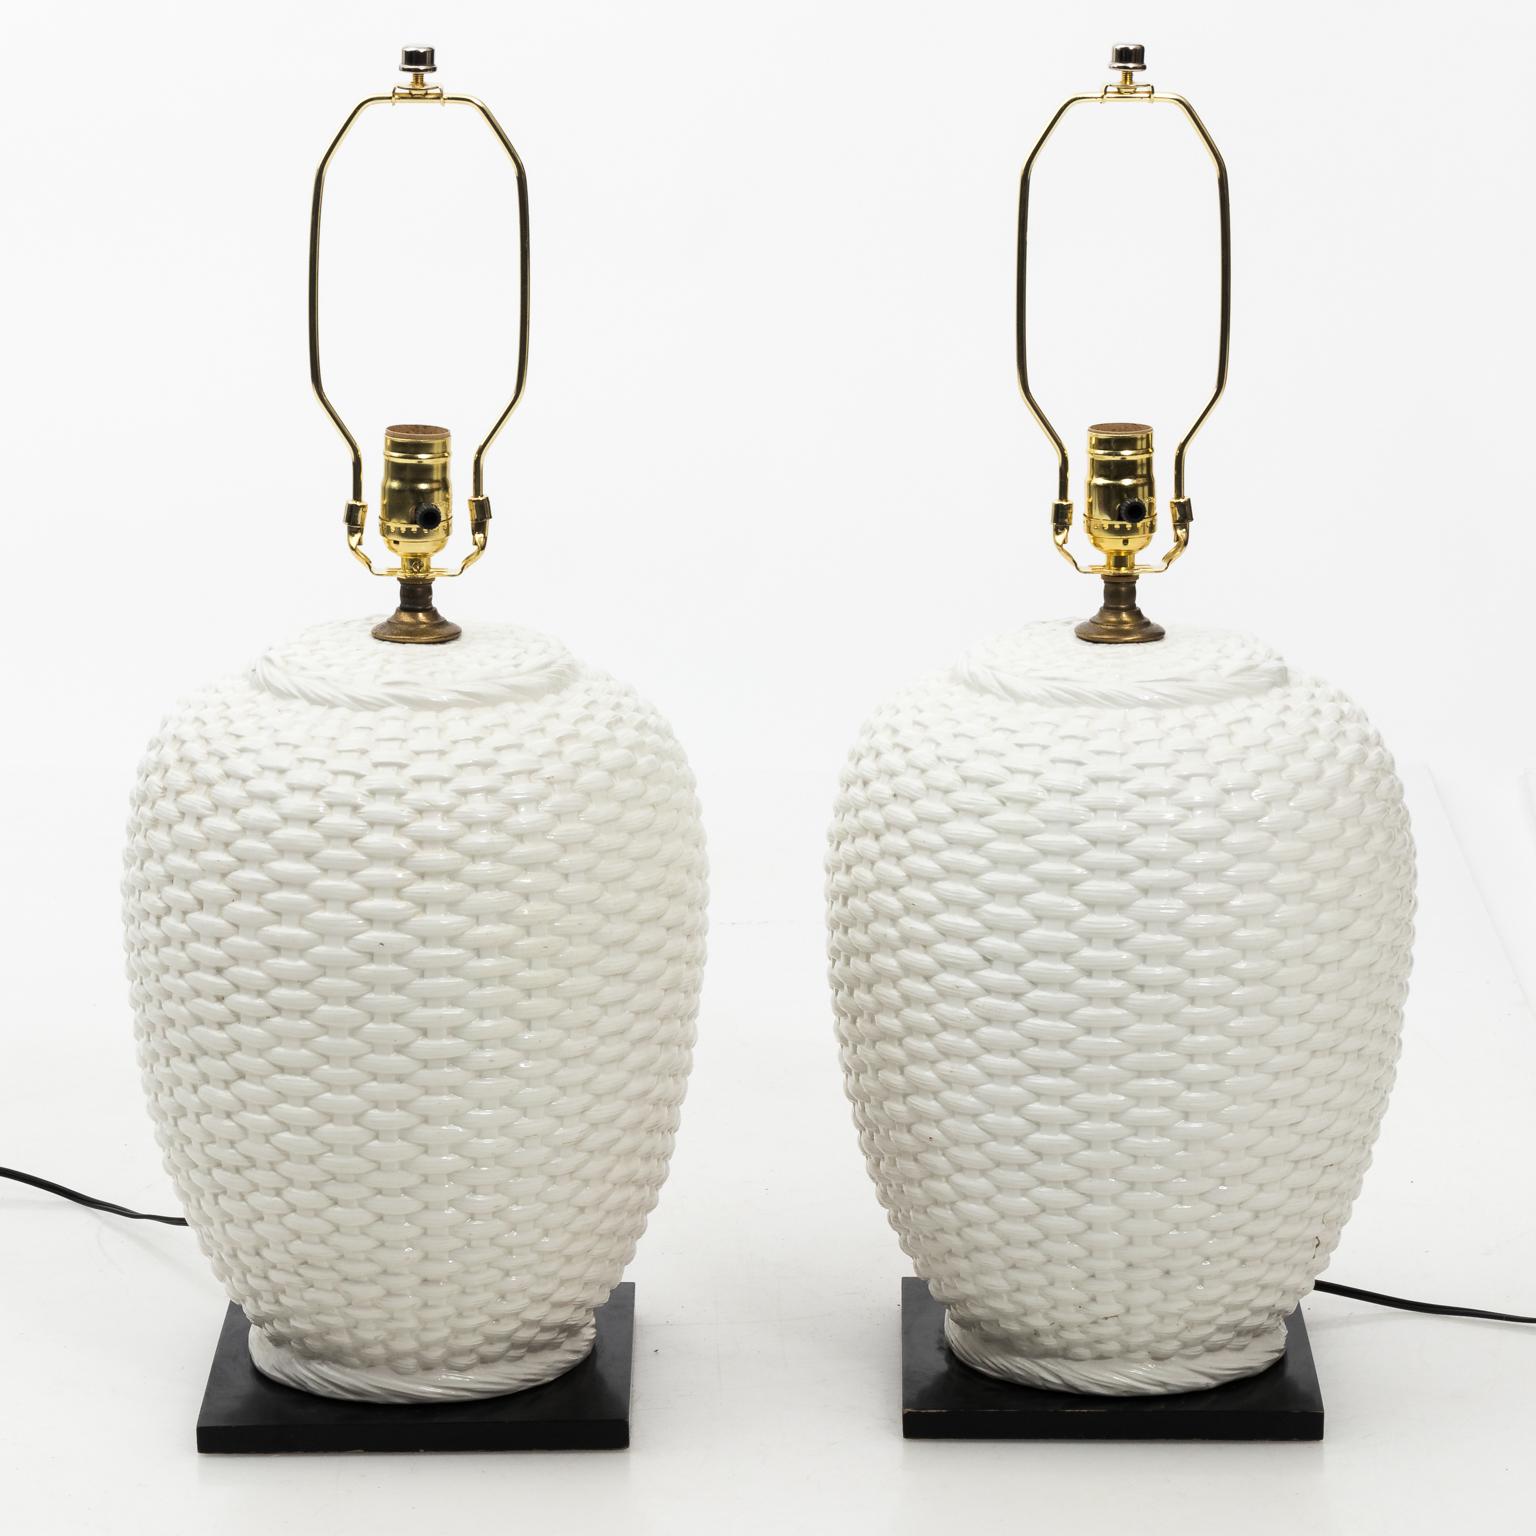 Pair of mid-20th century white ceramic basket weave lamps with drum shaped linen shades. Please note of a minor chip on the corner of the wood base.